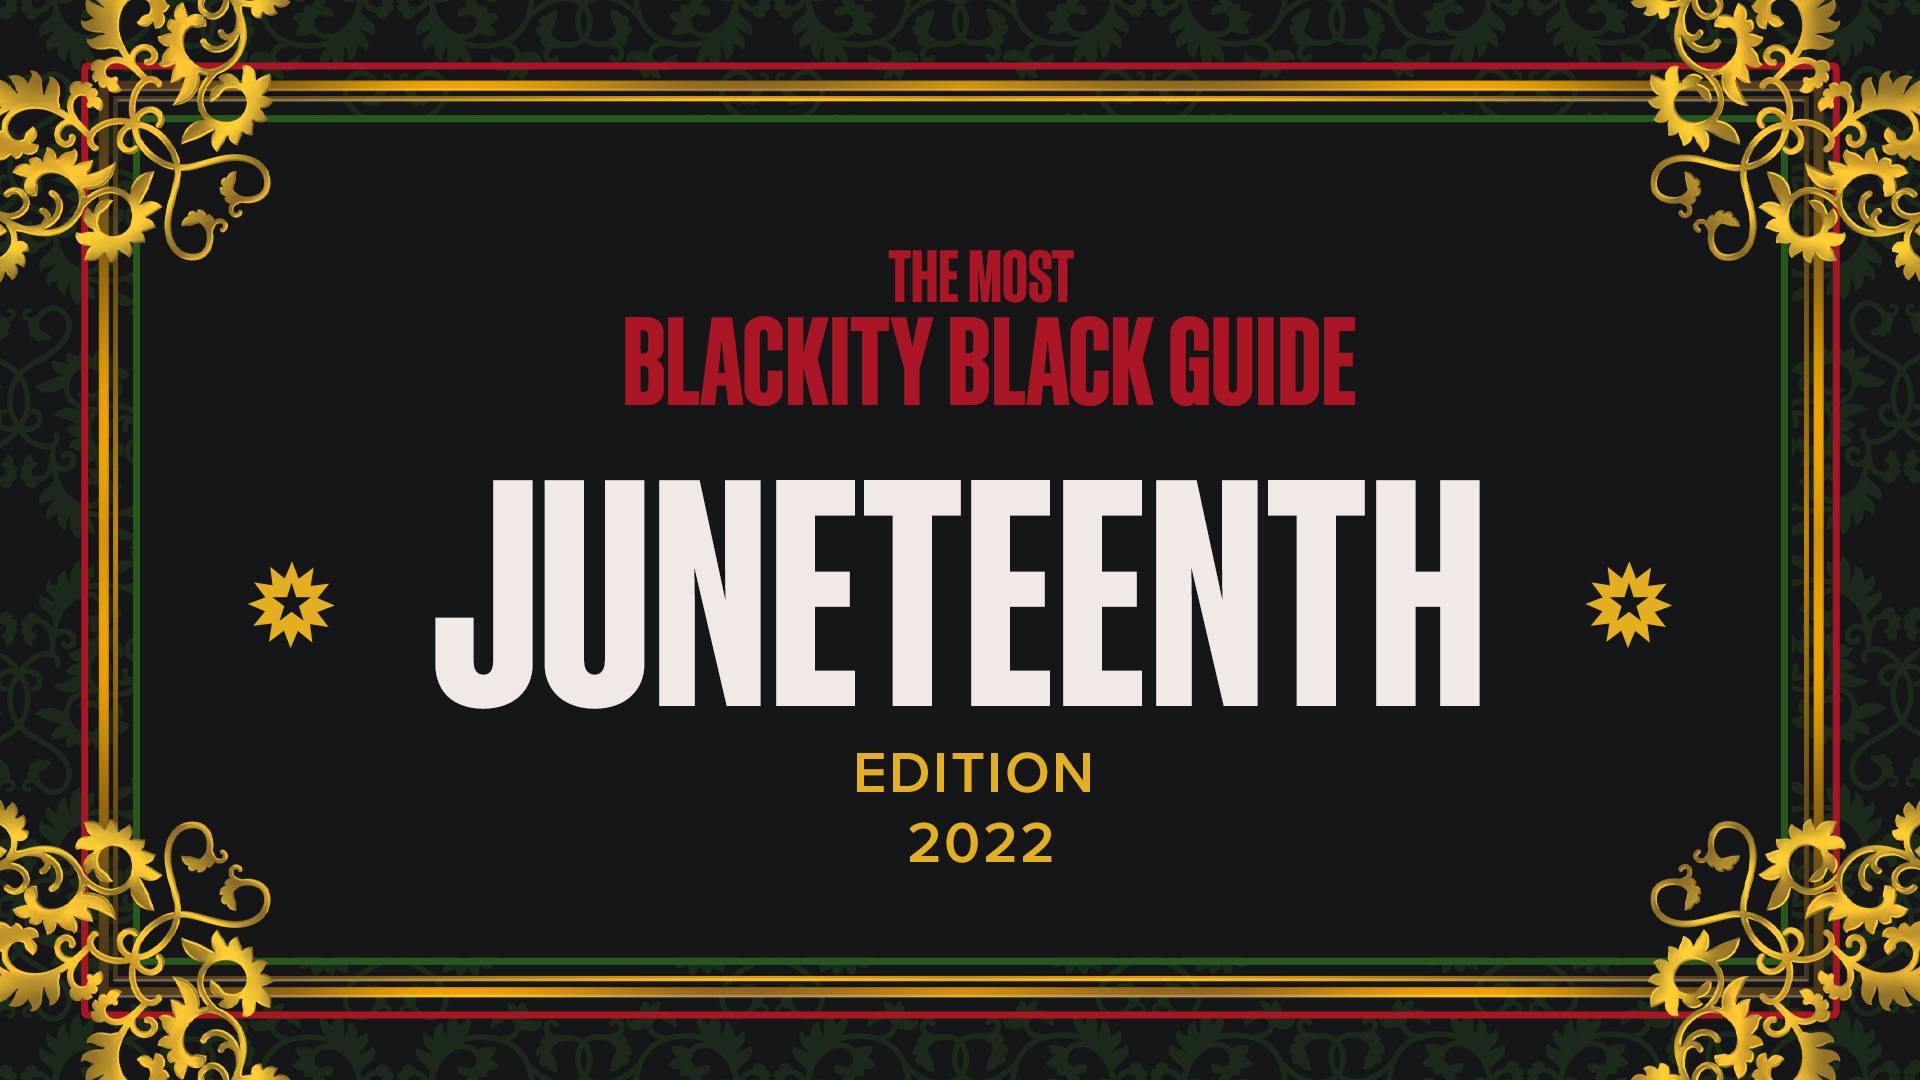 In honor of Juneteenth, who would be your ideal first Black